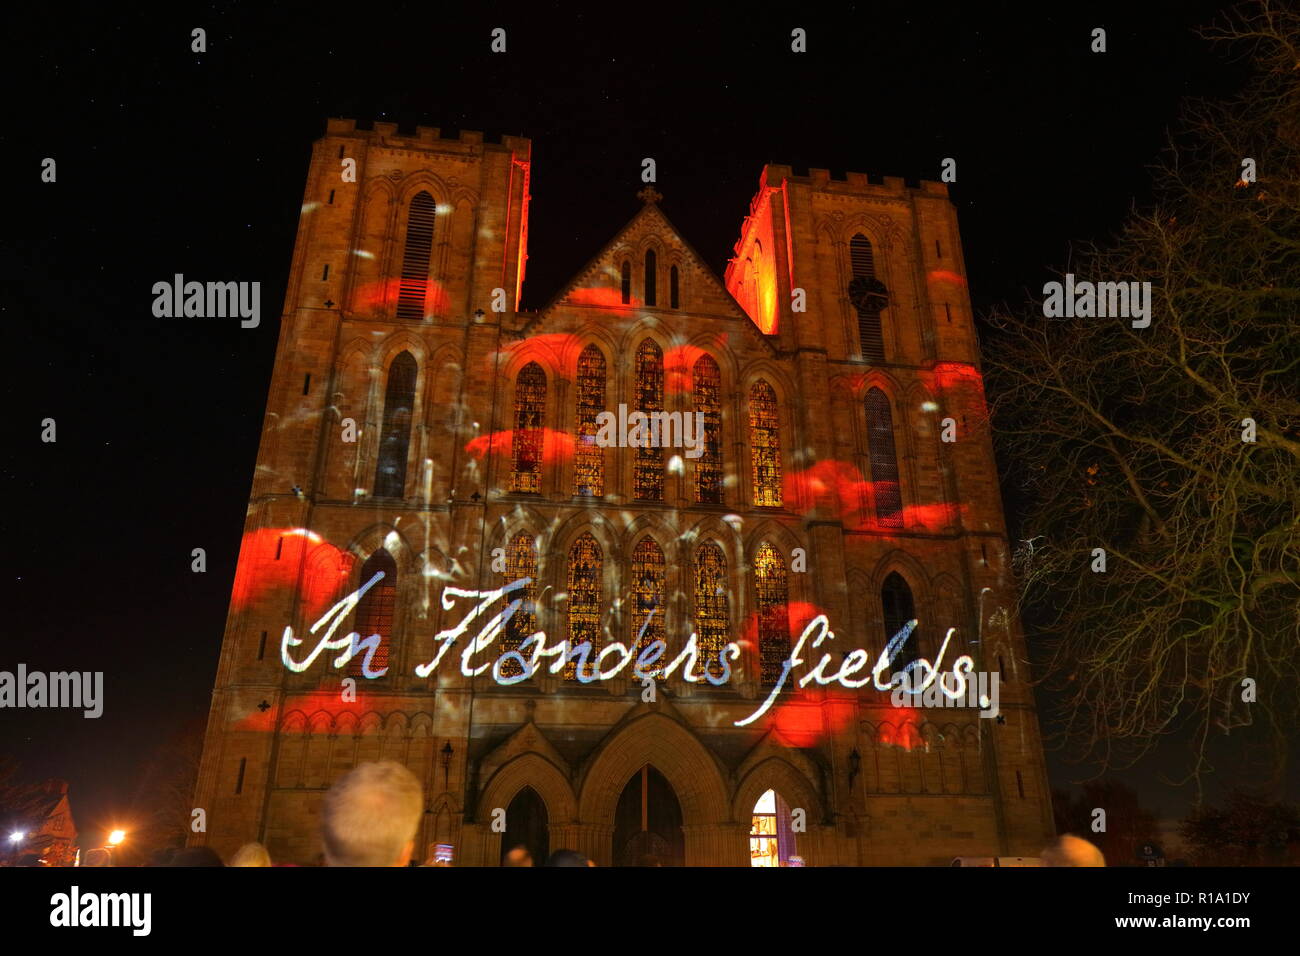 Ripon, North Yorkshire,10th November 2018. Ripon Cathedral lit up by animated projection, which shows photos from WW1 and lists of soldiers who lost their lives during the war. Credit: Yorkshire Pics/Alamy Live News Stock Photo